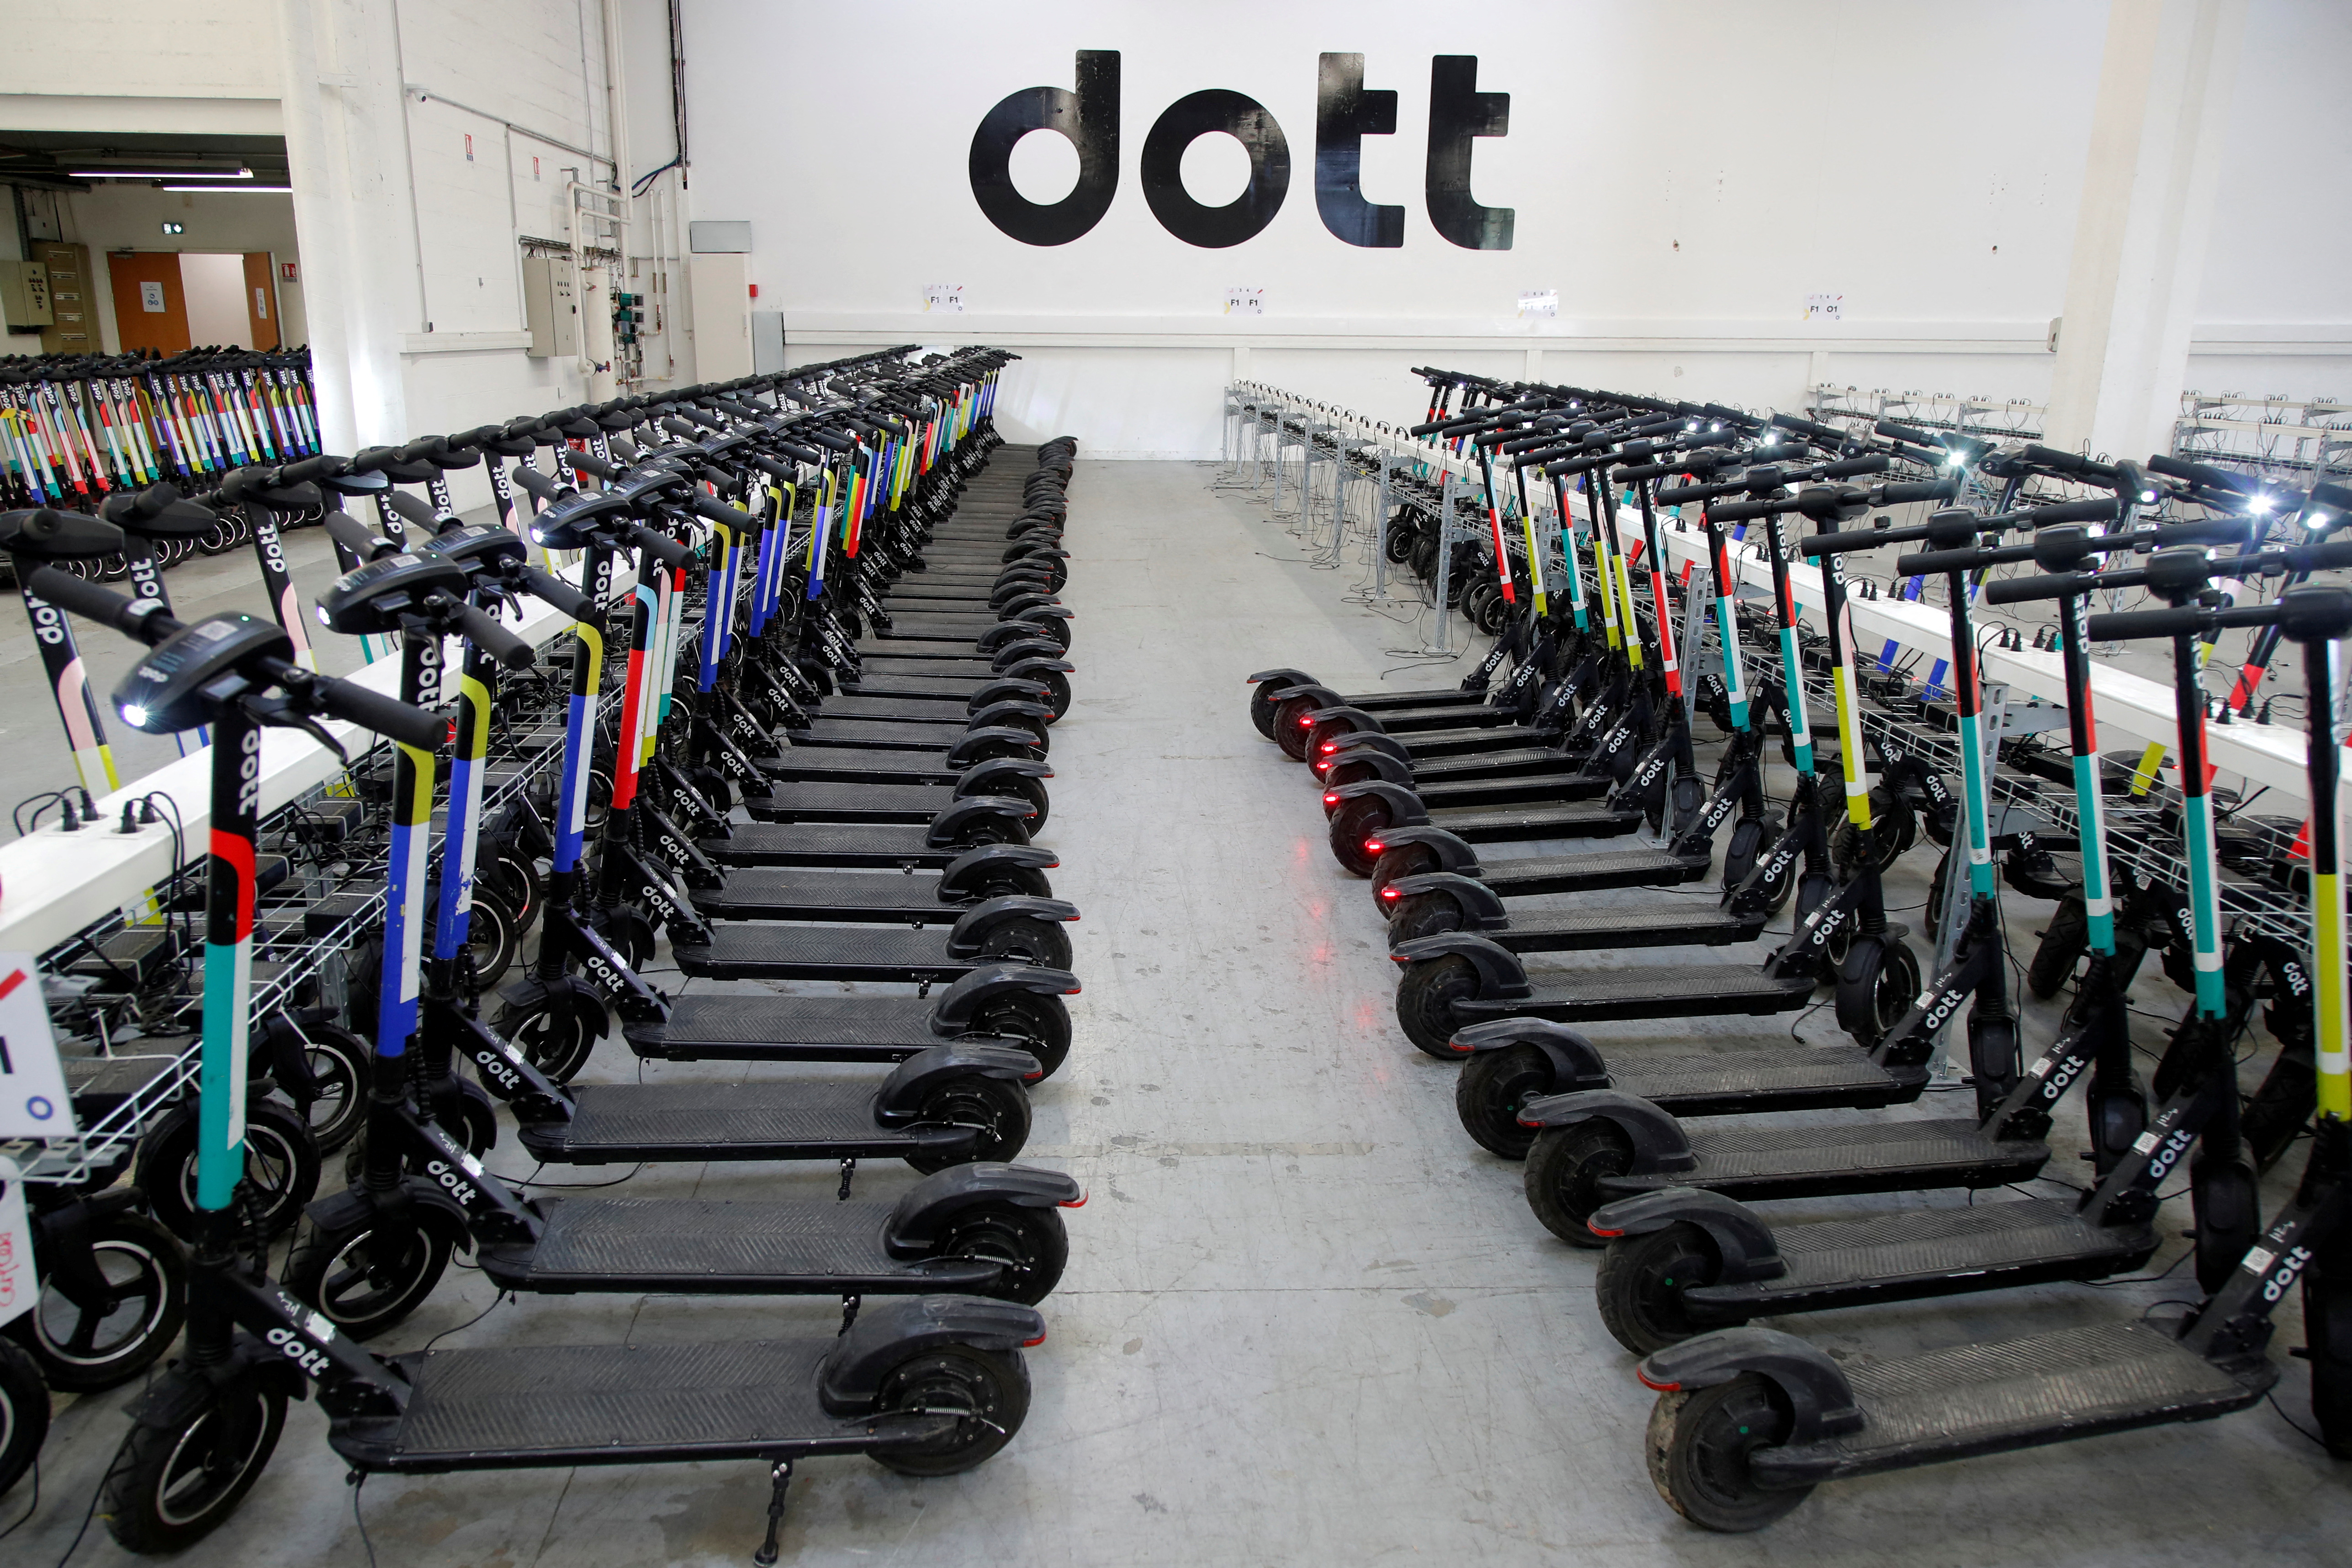 Electric scooters of Dott sharing service are seen at the company's headquarters in Wissous, near Paris